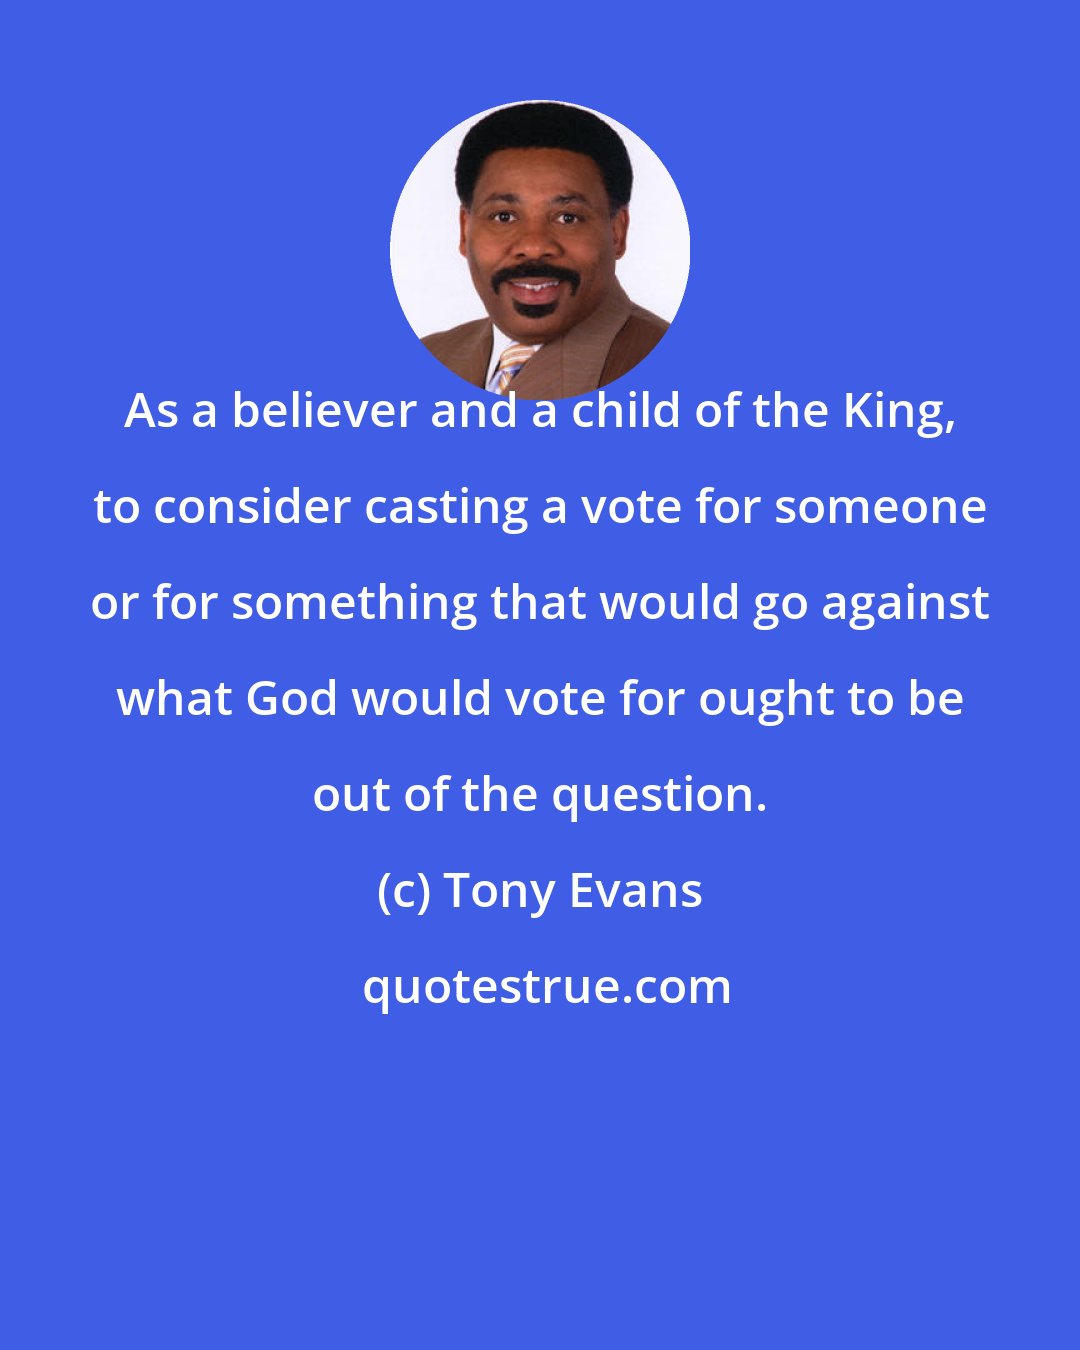 Tony Evans: As a believer and a child of the King, to consider casting a vote for someone or for something that would go against what God would vote for ought to be out of the question.